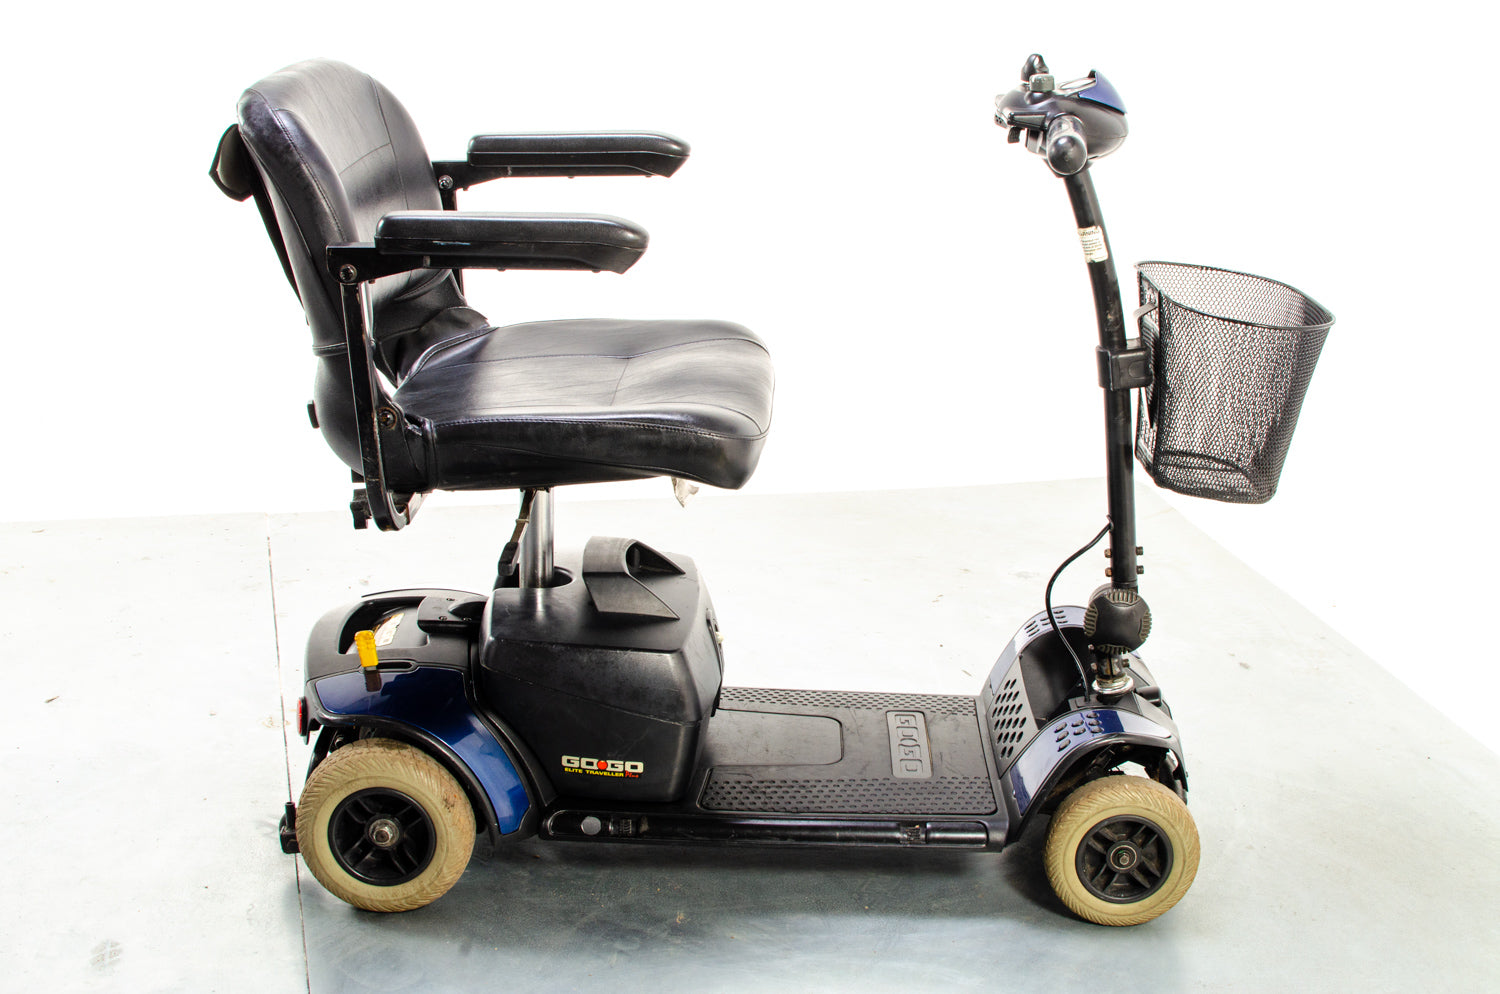 Pride Go-Go Elite Traveller Plus Used Mobility Scooter Small Transportable Lightweight Folding